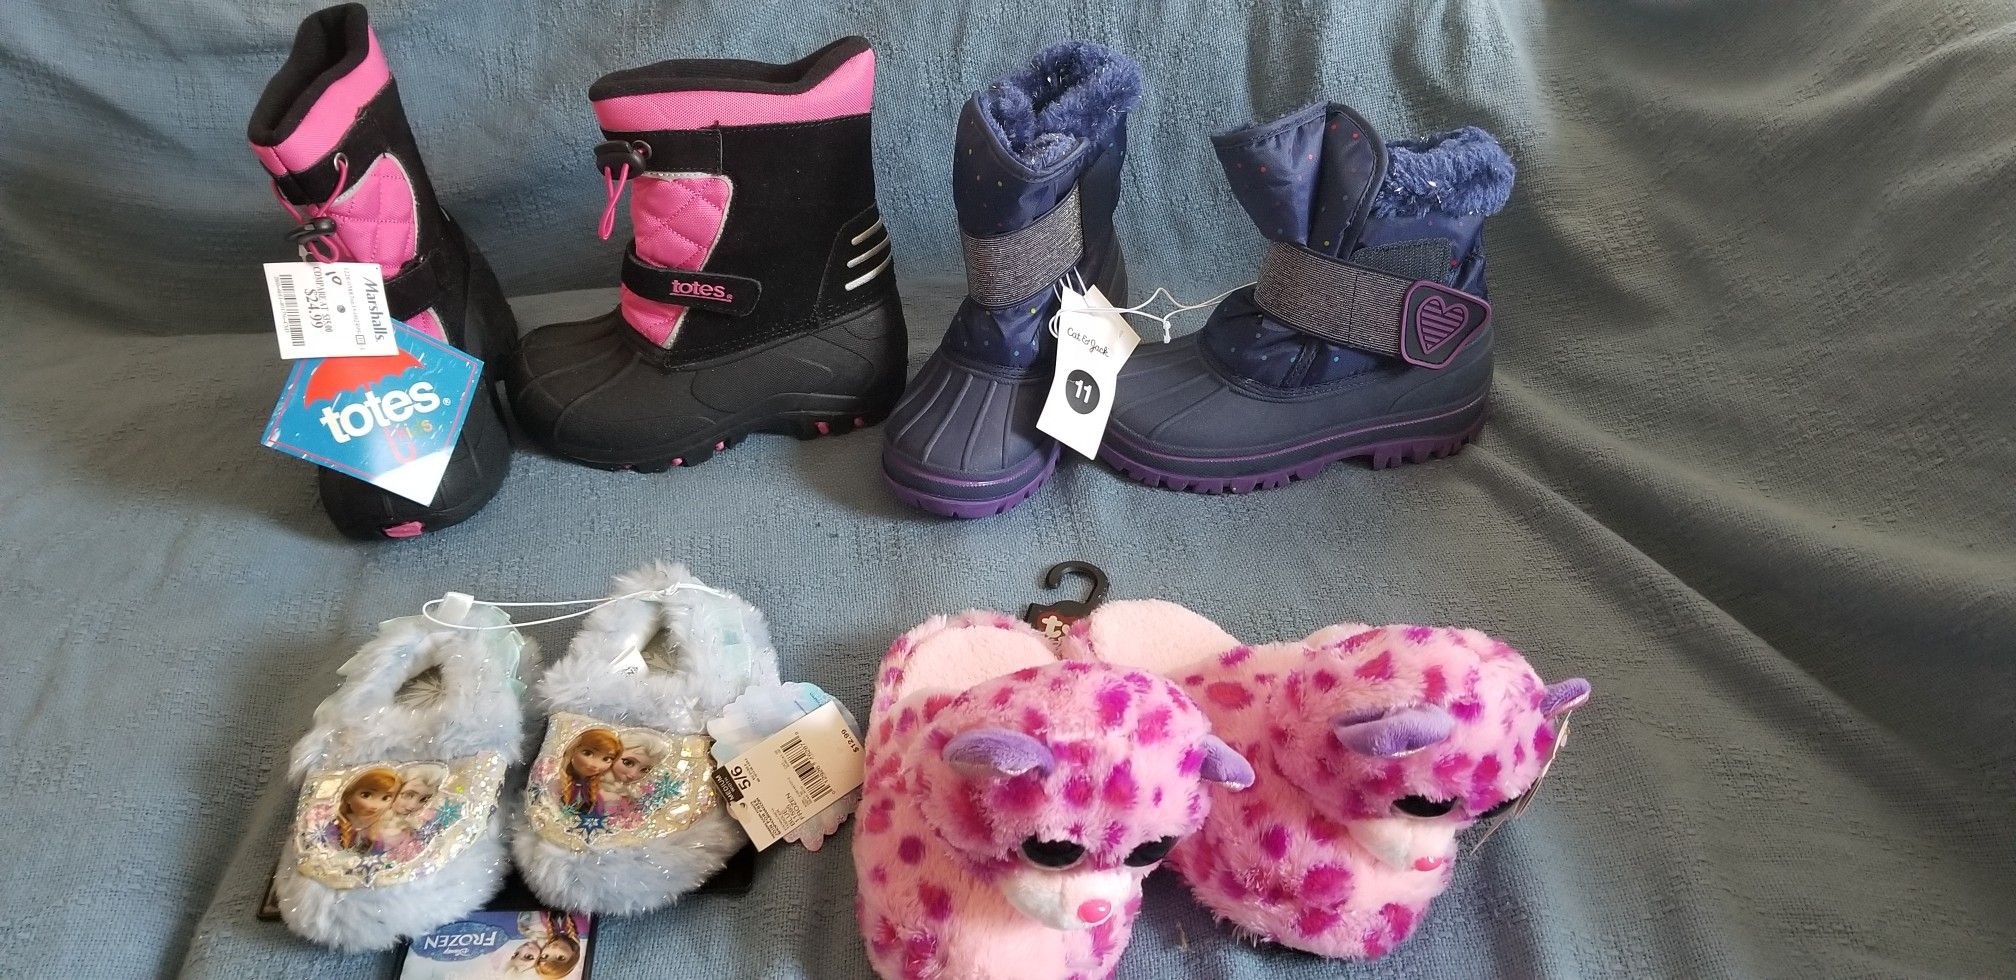 New Girls boots and slippers